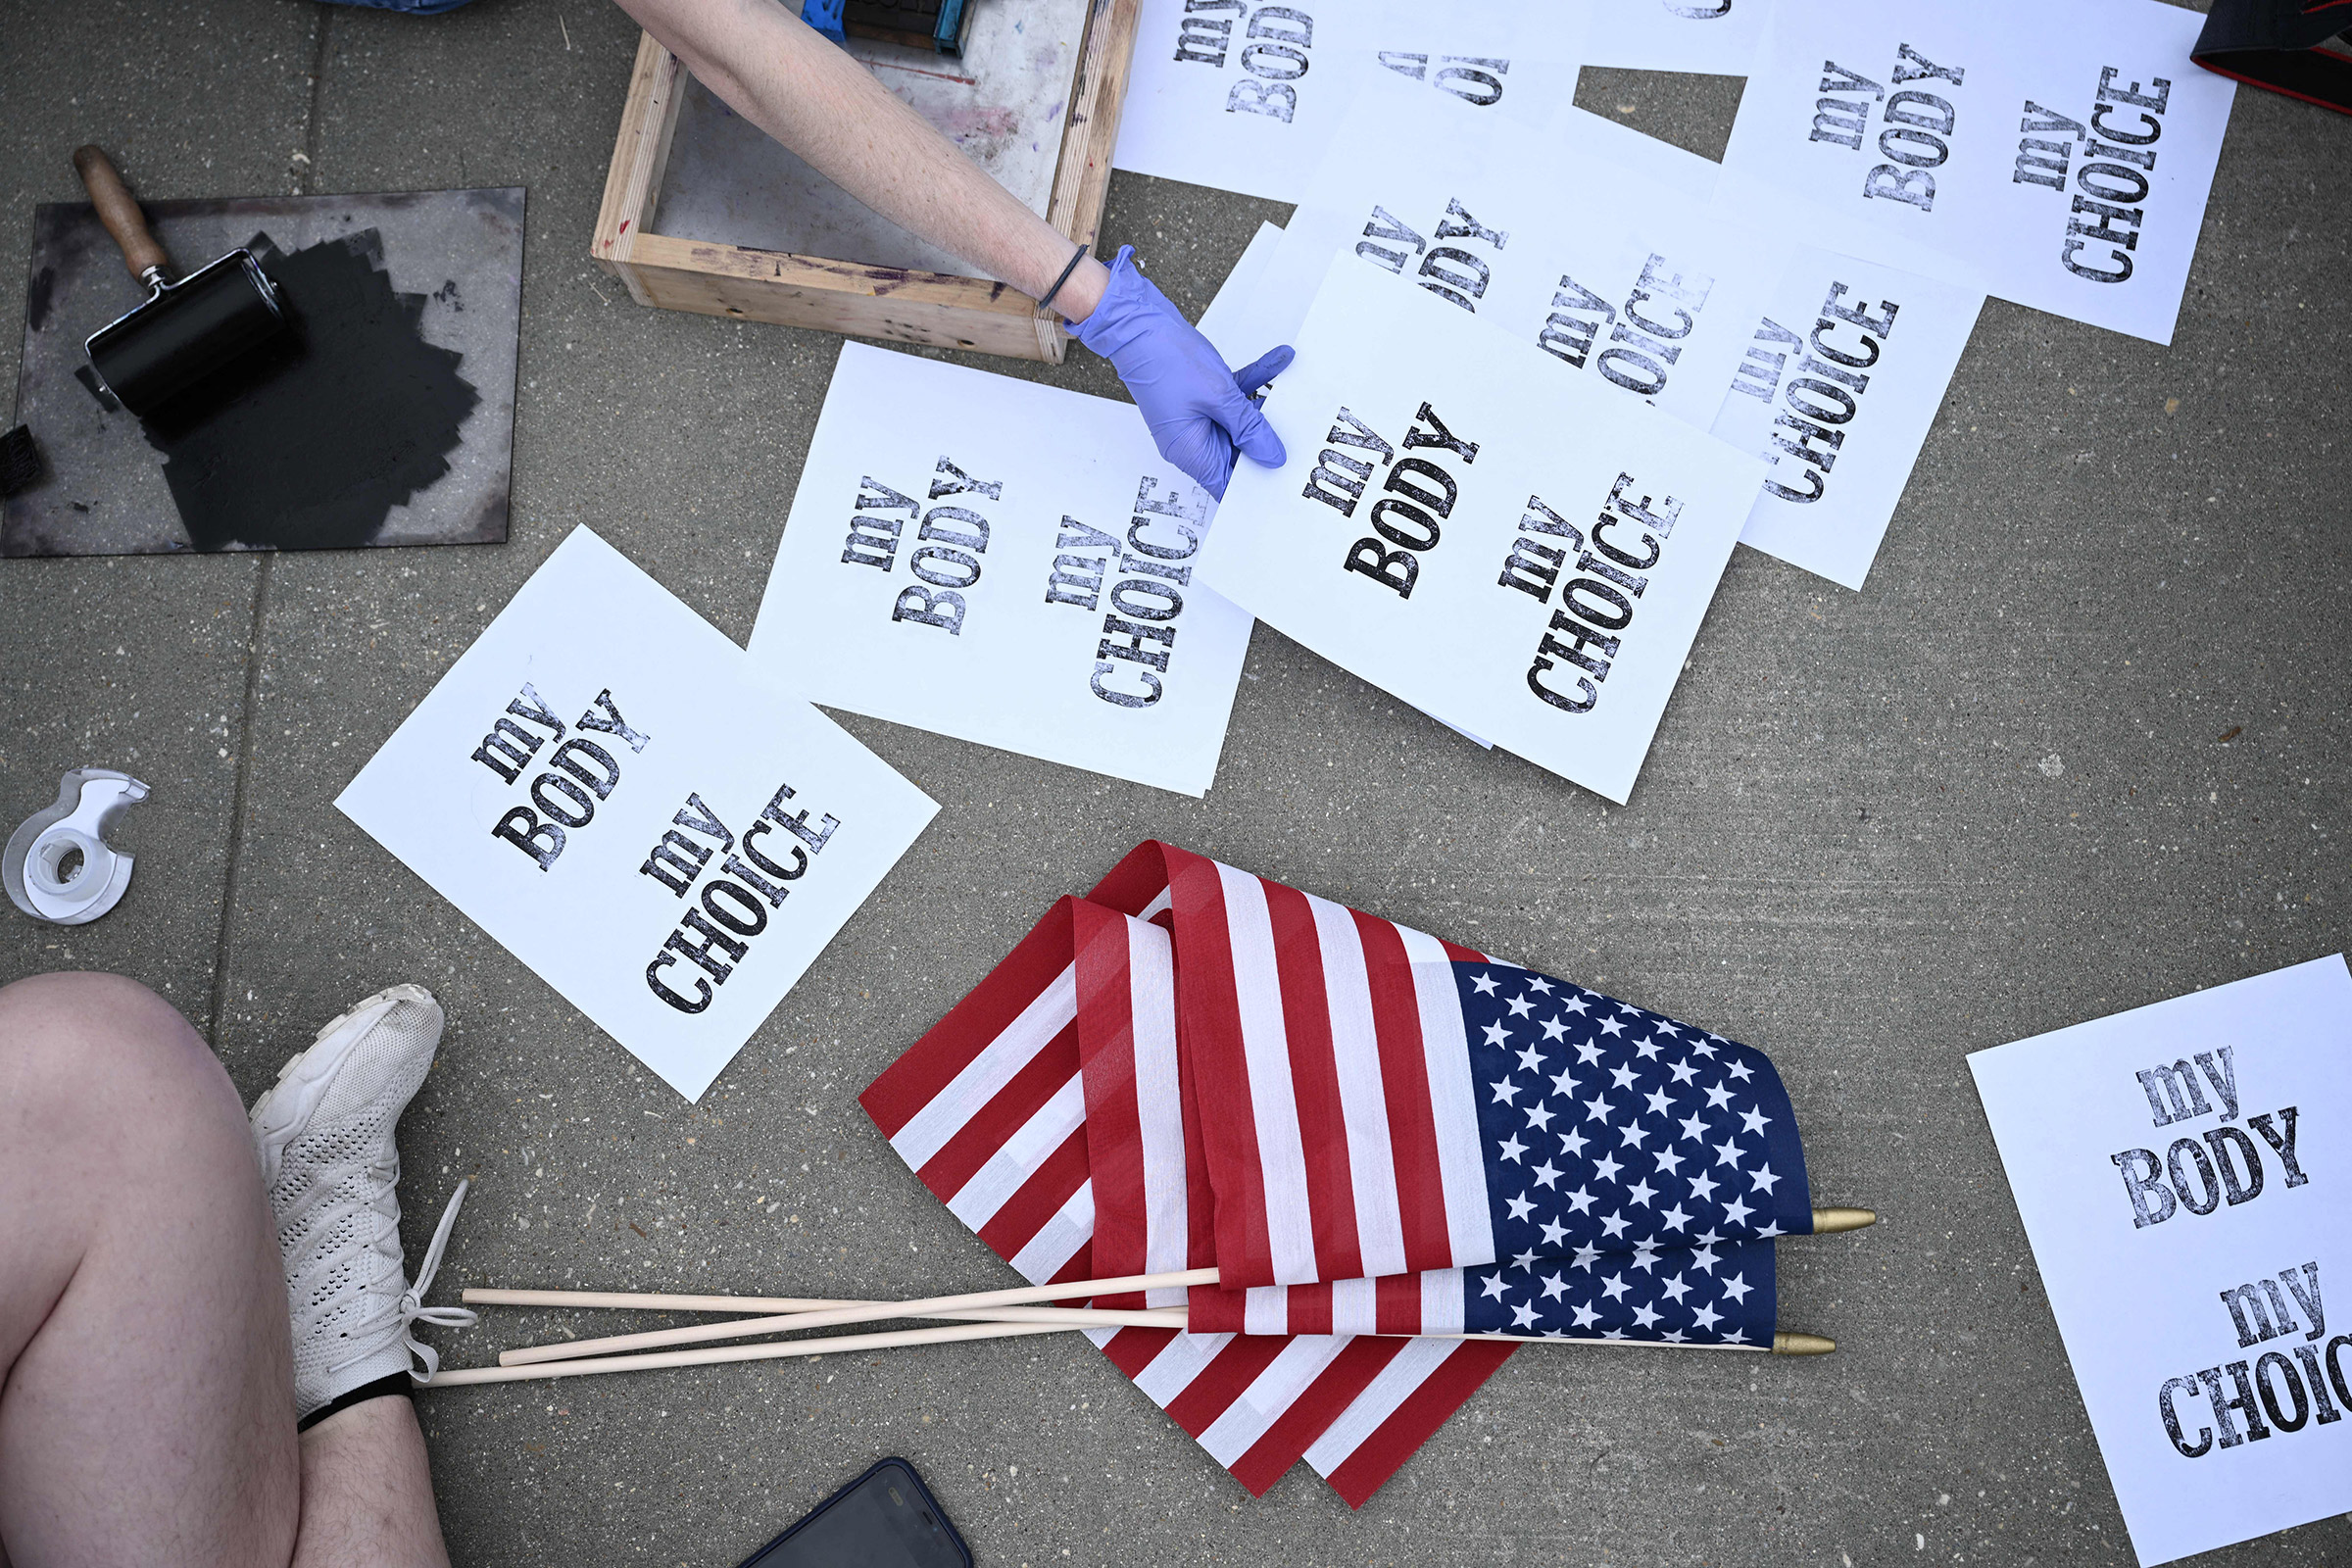 Pro-choice demonstrators make signs in front of the US Supreme Court in Washington, DC, on May 3, 2022. (Brendan Smialowski—AFP/Getty Images)